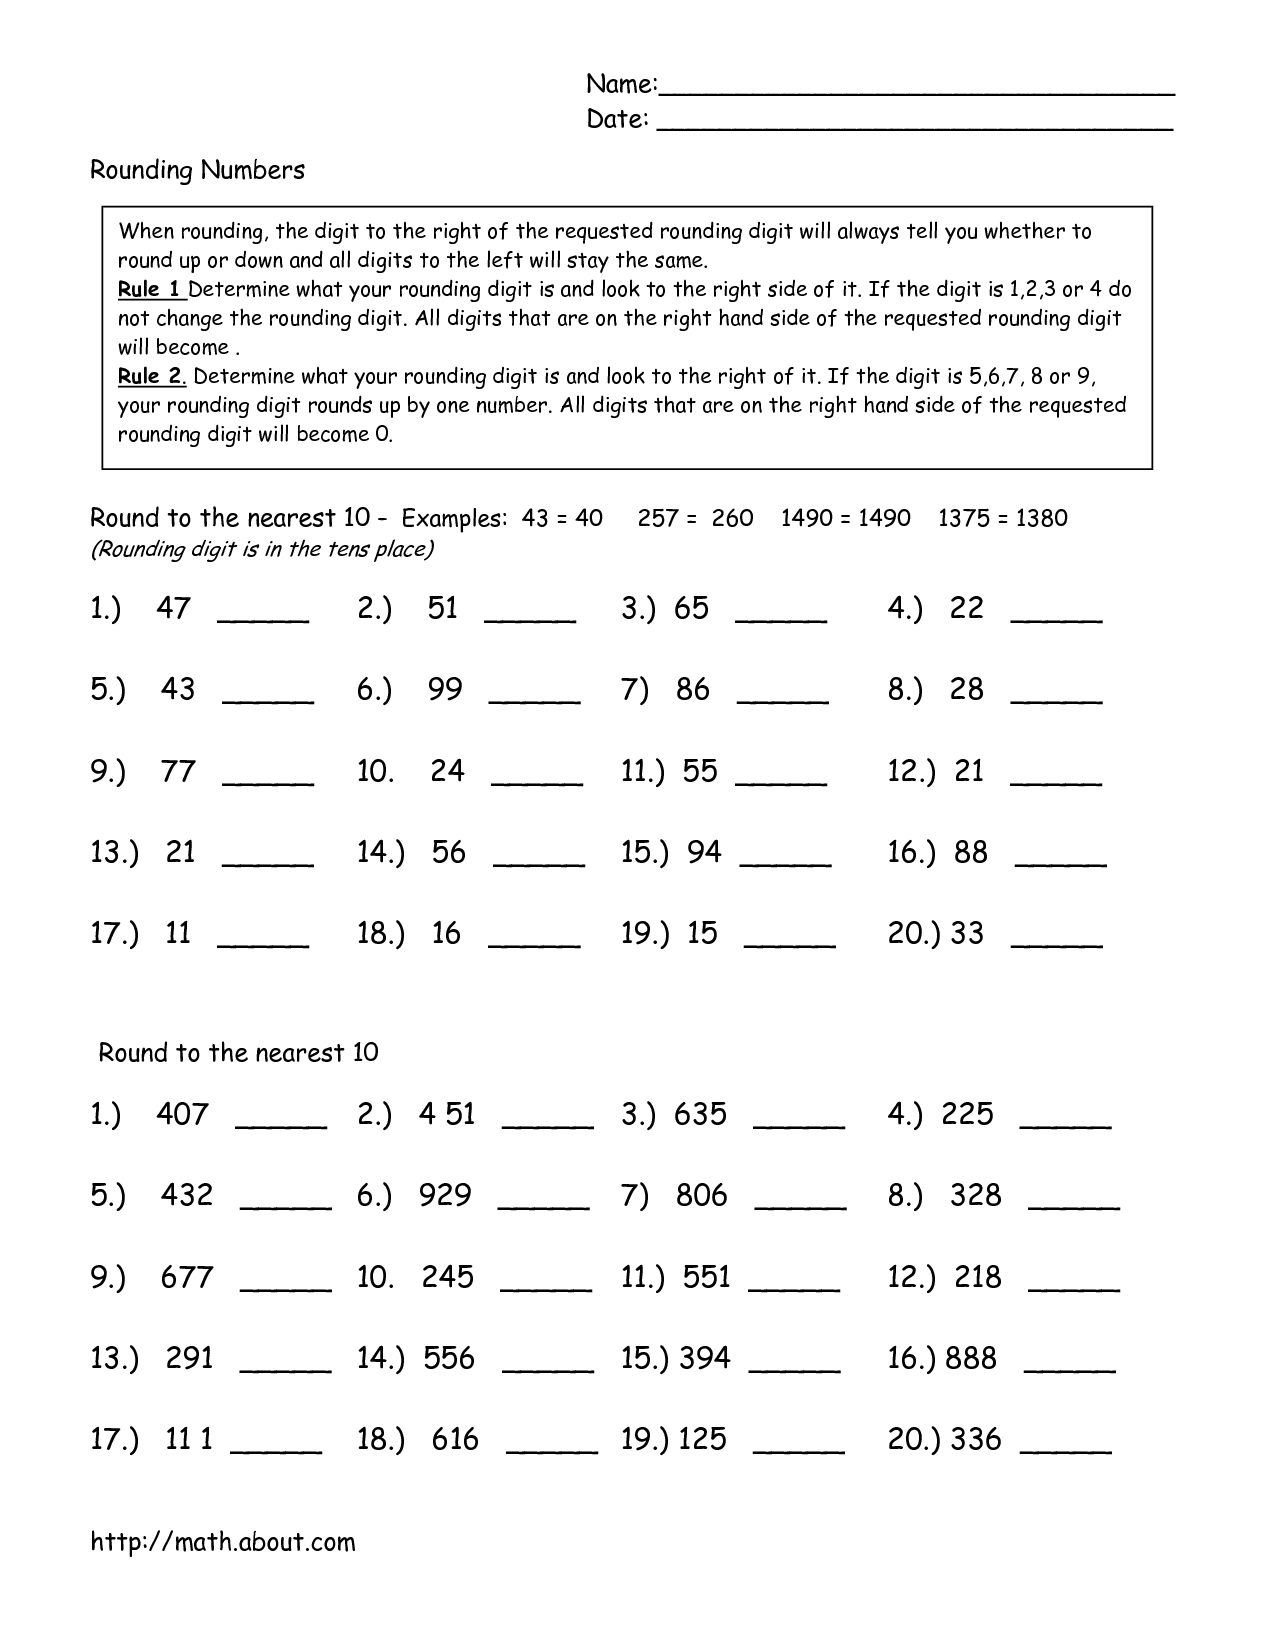 ged practice math questions and answers